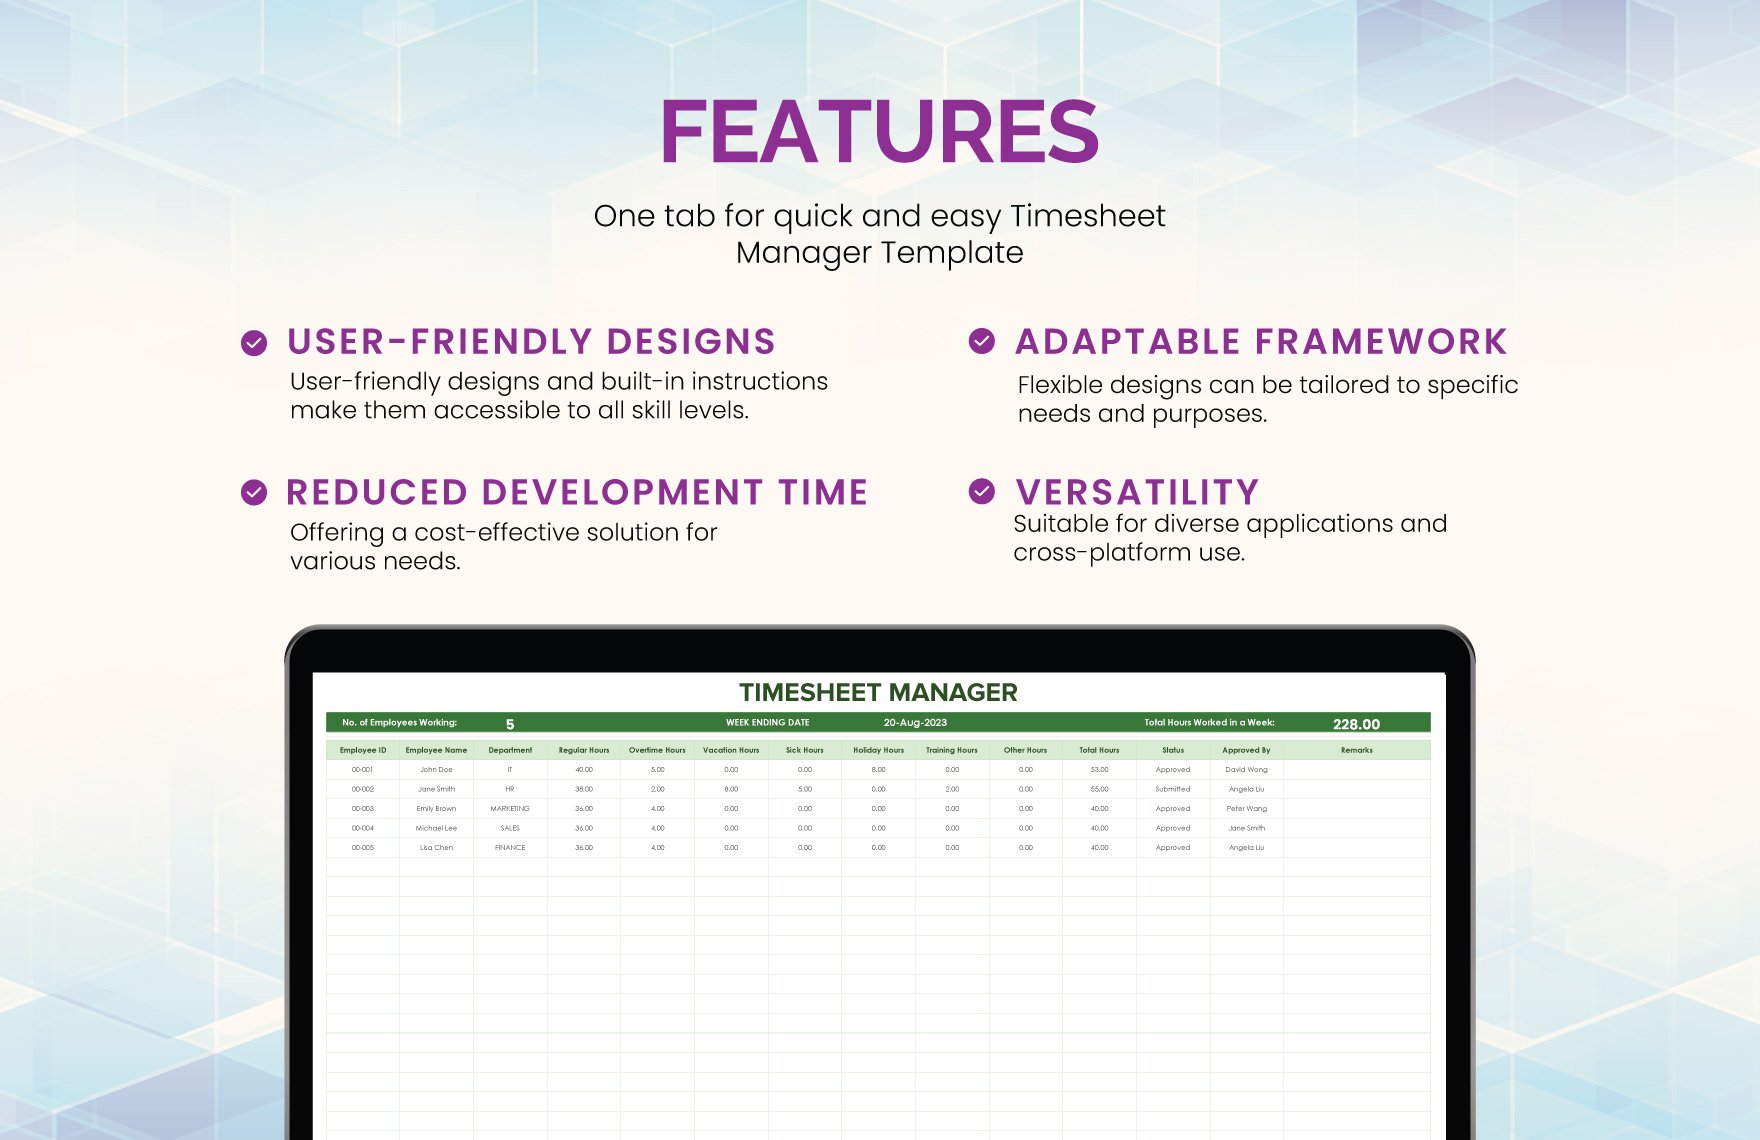 Timesheet Manager Template